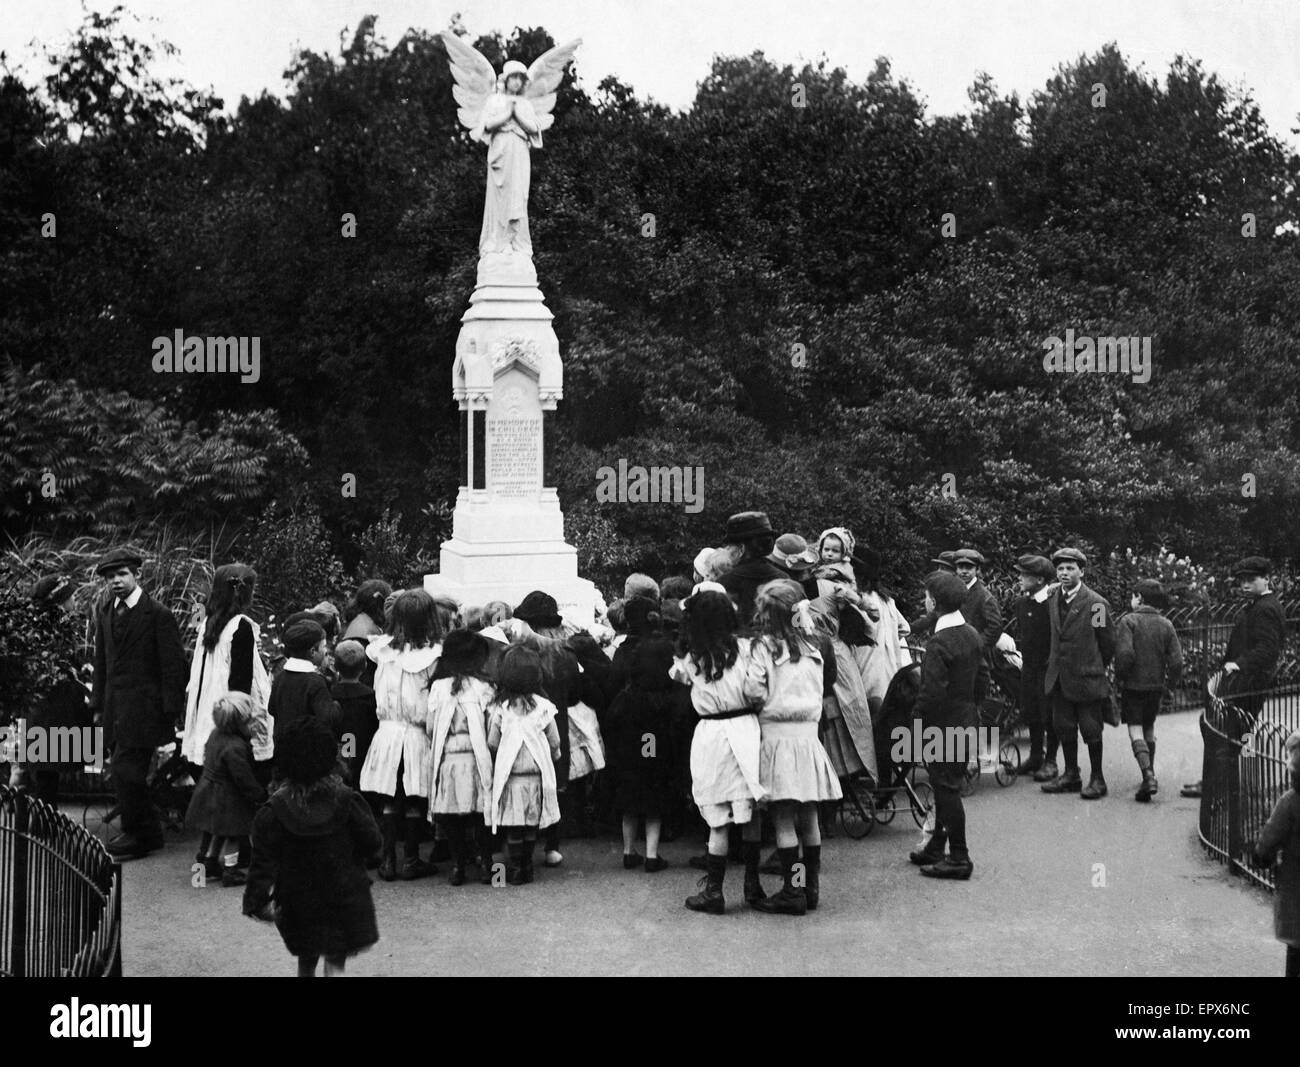 Memorial to the 18 children of the Upper North Street School who were killed during a daylight air raid on the capital by German Gotha bomber on the 13th June 1917. The mayor Mr Alfred H Warren unveiled the memorial in Wanstead Park Ilford on the 5th July Stock Photo